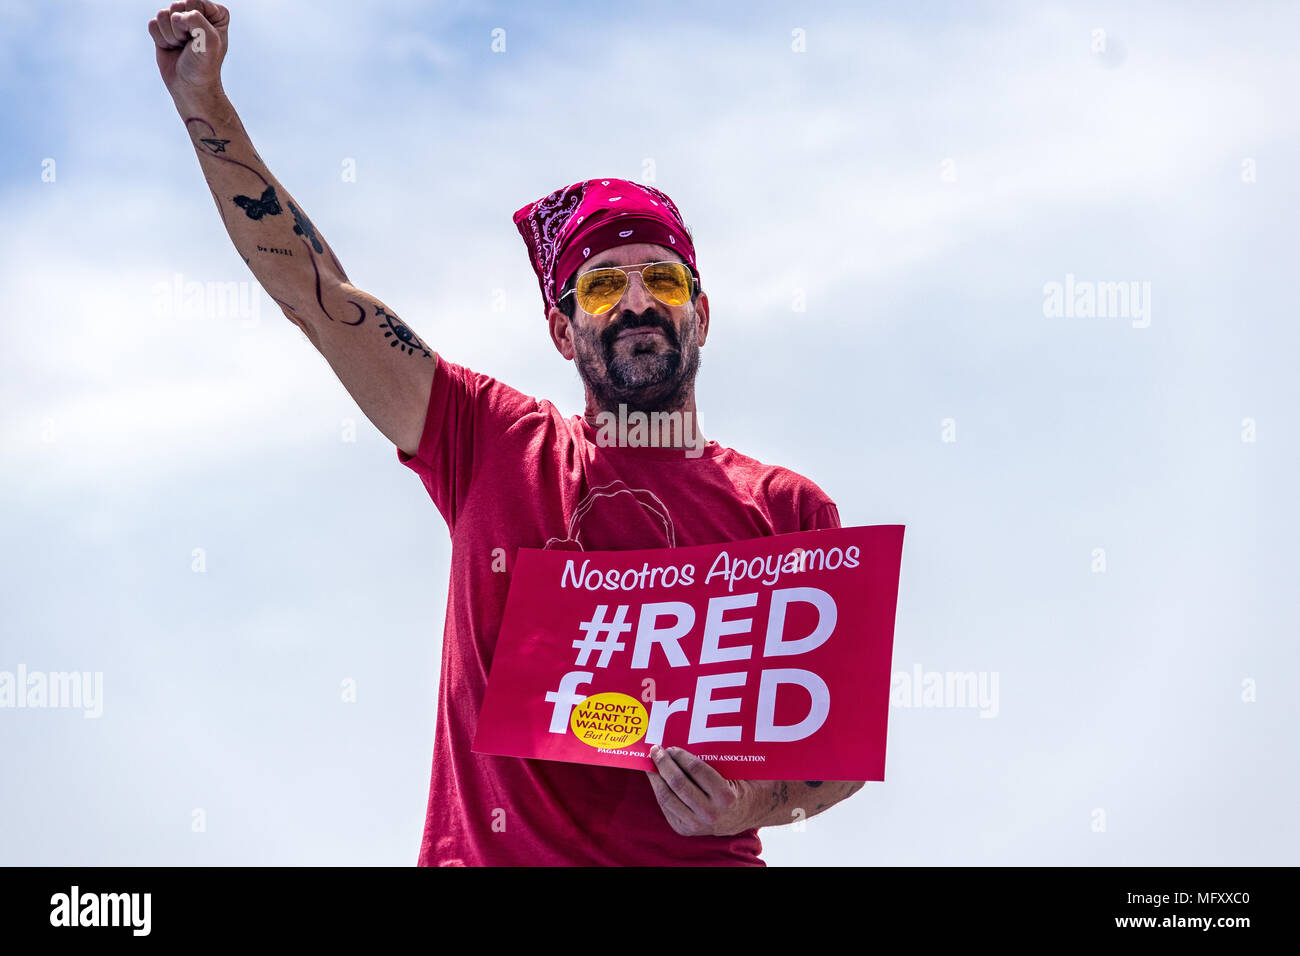 Phoenix, USA, 26 avril 2018, le n° RedForEd REDforED - Mars nous APOYAMOS. Credit : Michelle Jones - Arizona/Alamy Live News. Banque D'Images